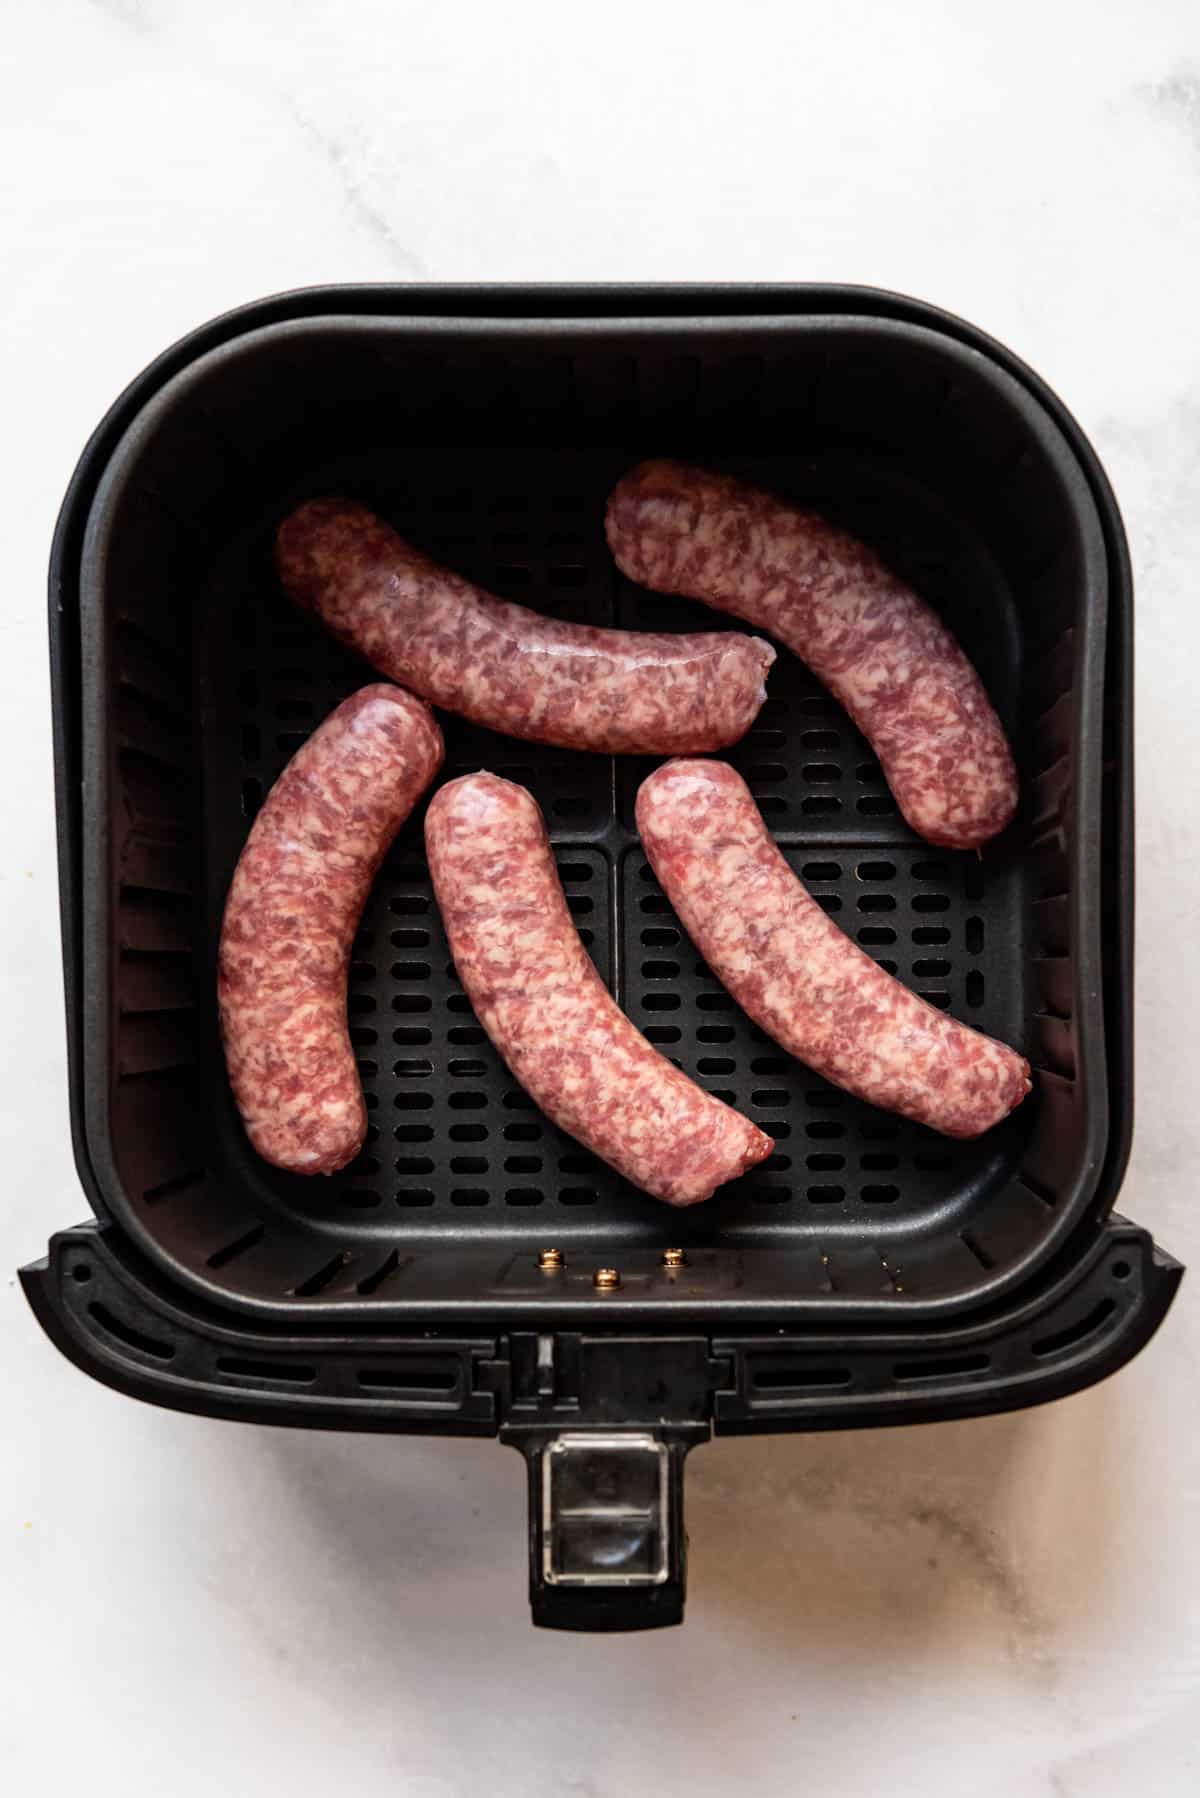 Top view of a square air fryer basket with uncooked brats sausages in it.